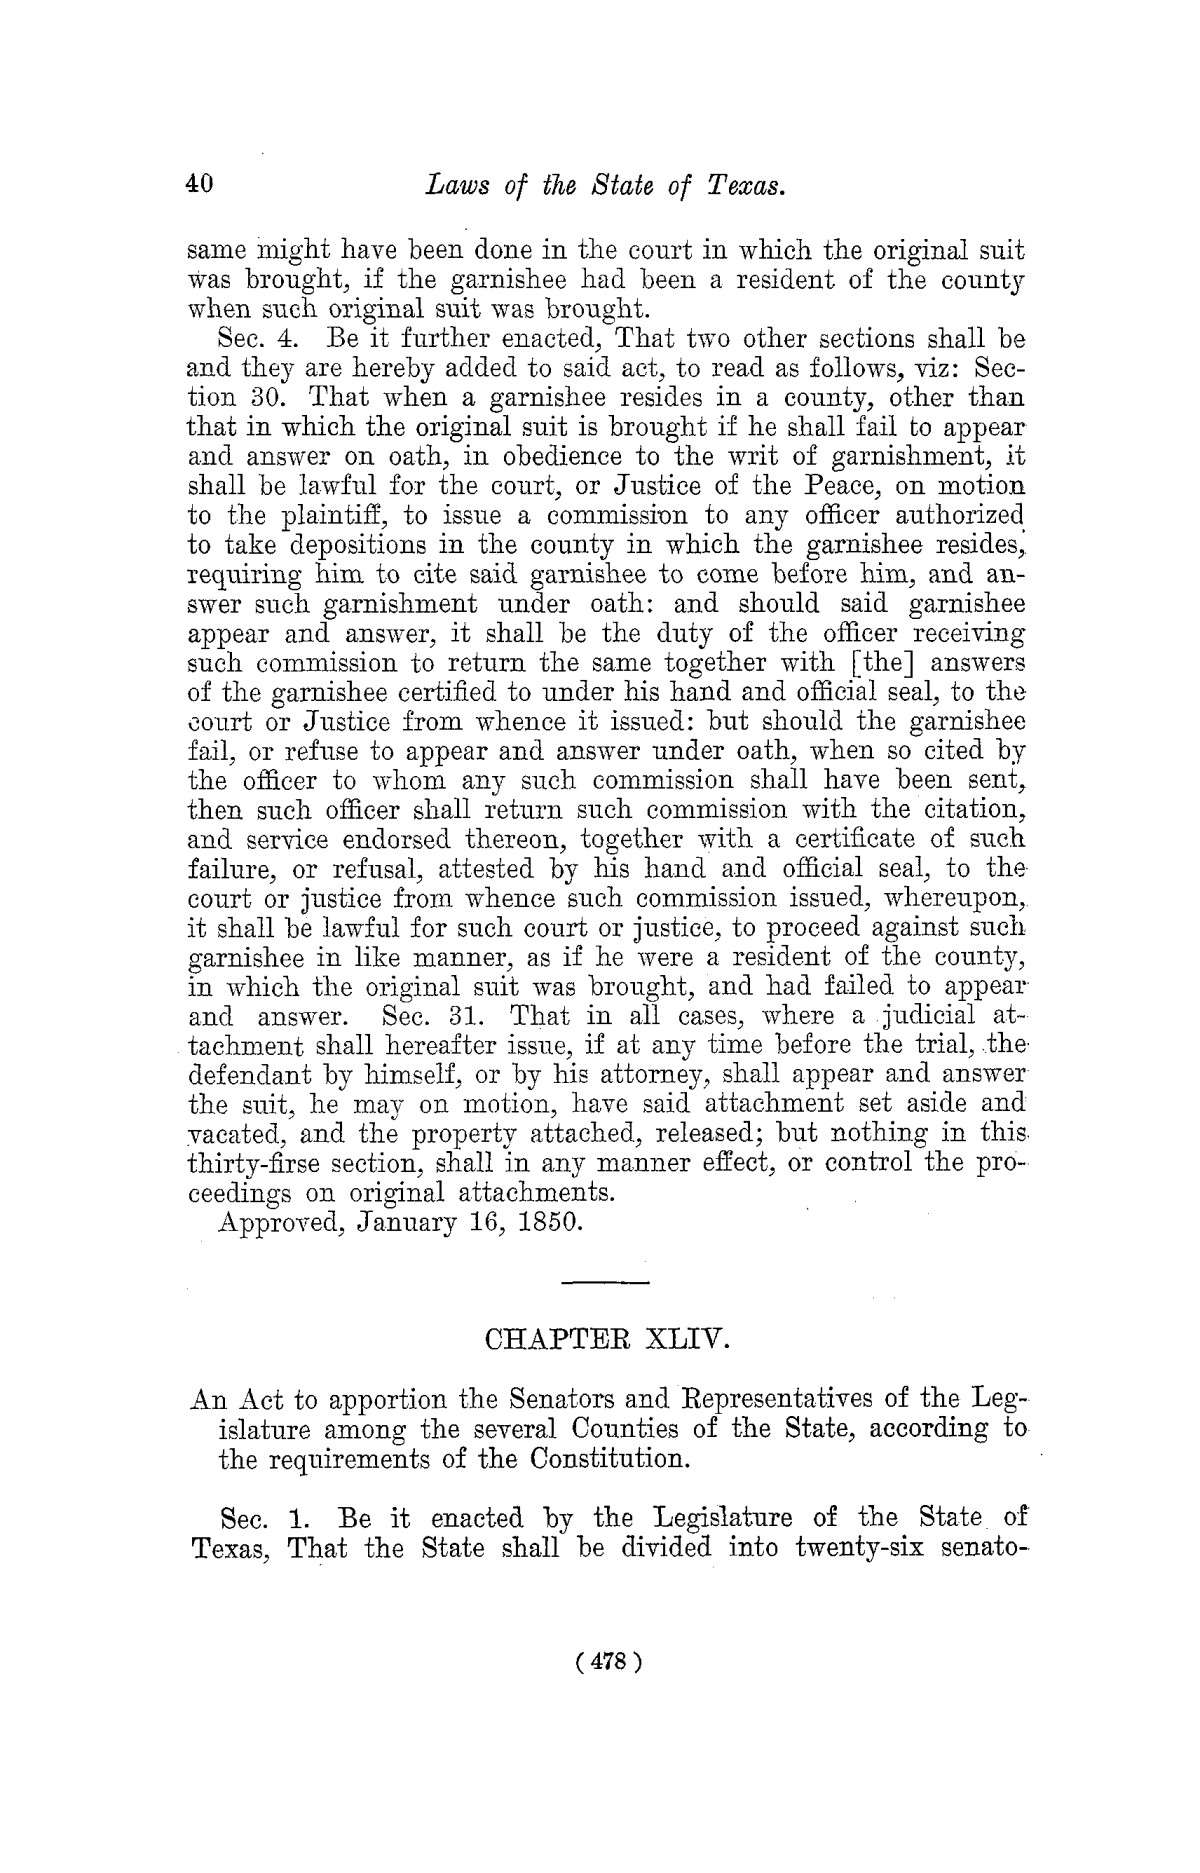 The Laws of Texas, 1822-1897 Volume 3
                                                
                                                    478
                                                